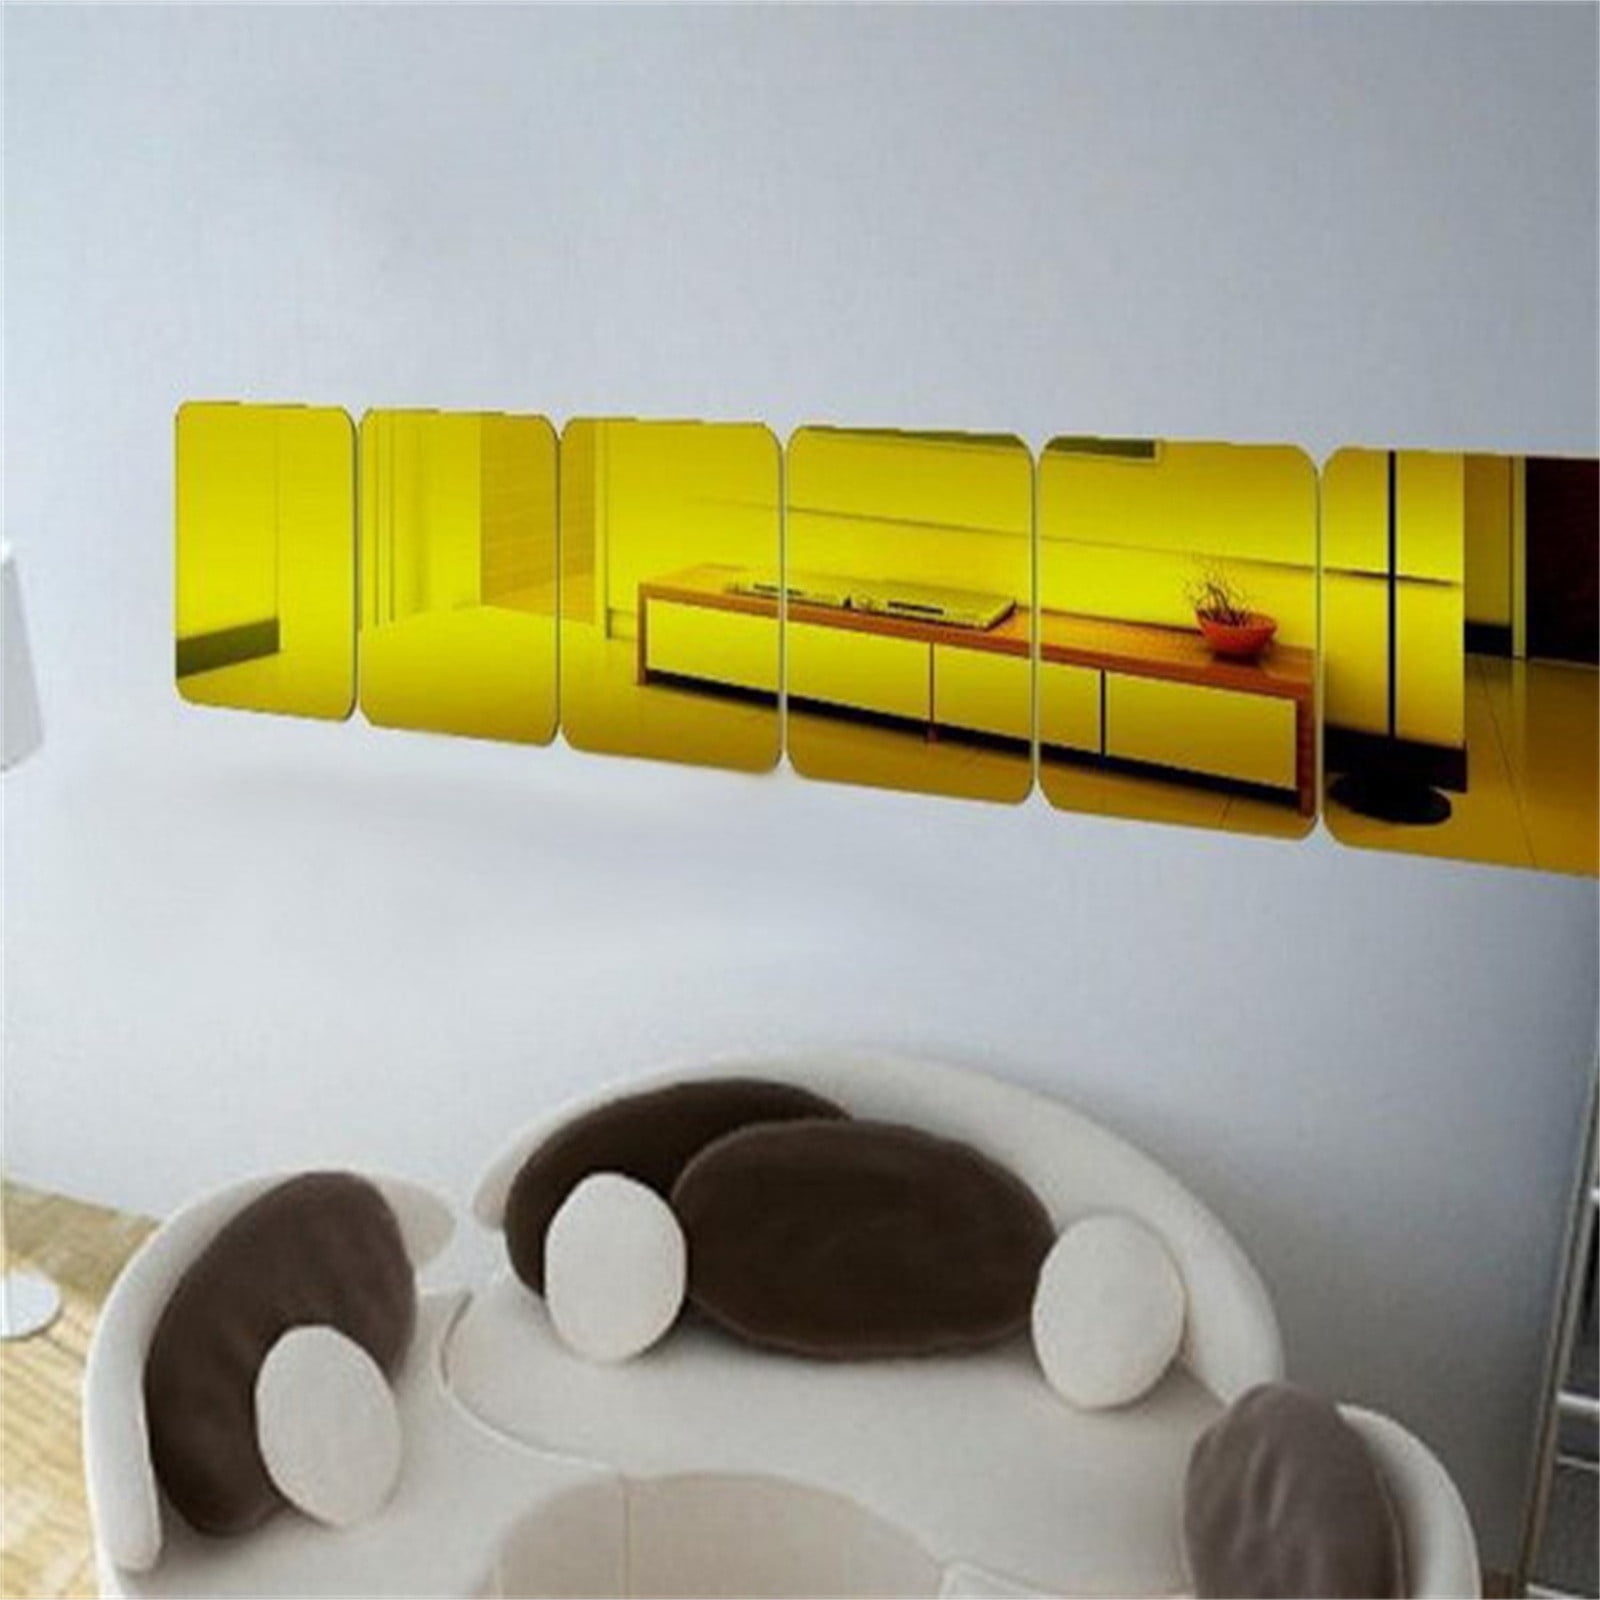 4pcs Square Mirror Wall Sticker Acrylic Frameless Flexible Mirror Sheets Full Body Mirror Wall Mirror Tiles for Bedroom Home Bathroom 10cmx10cm, Other